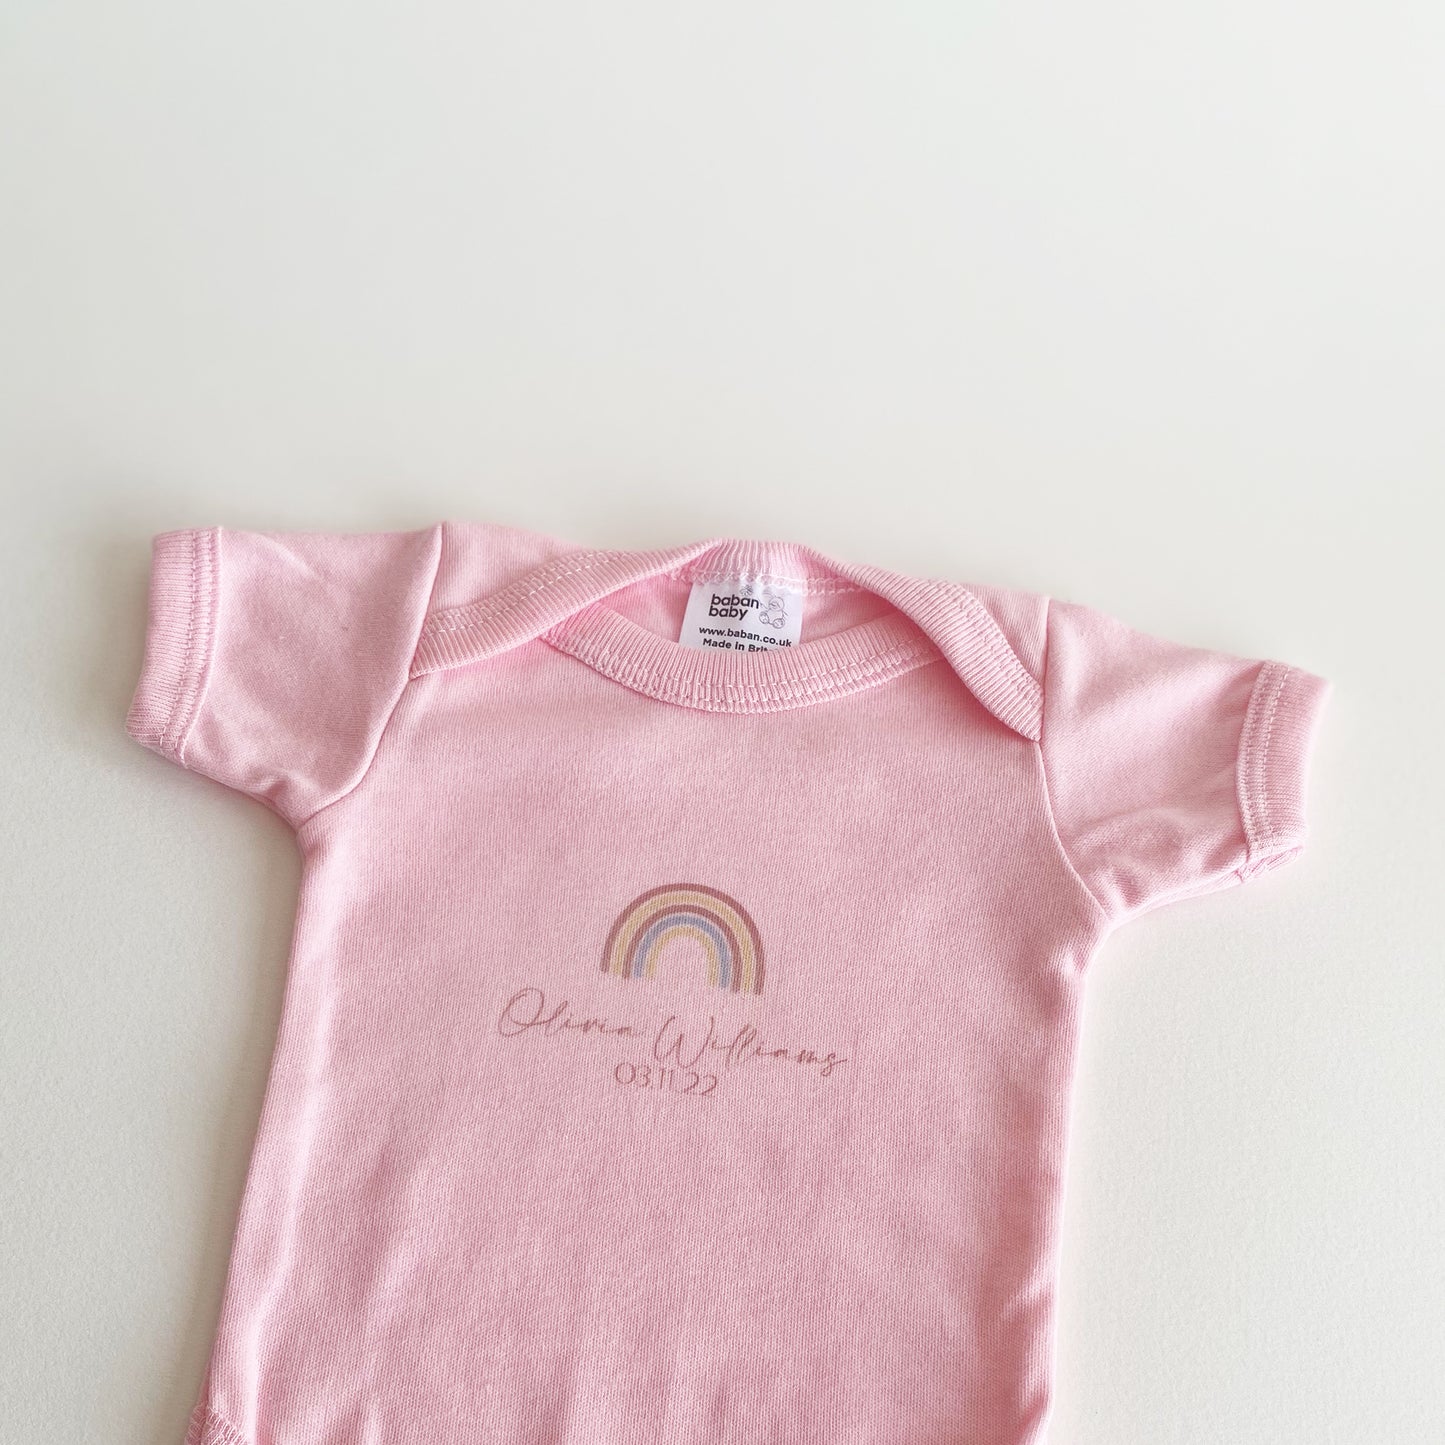 Personalised Baby Vest in Pink